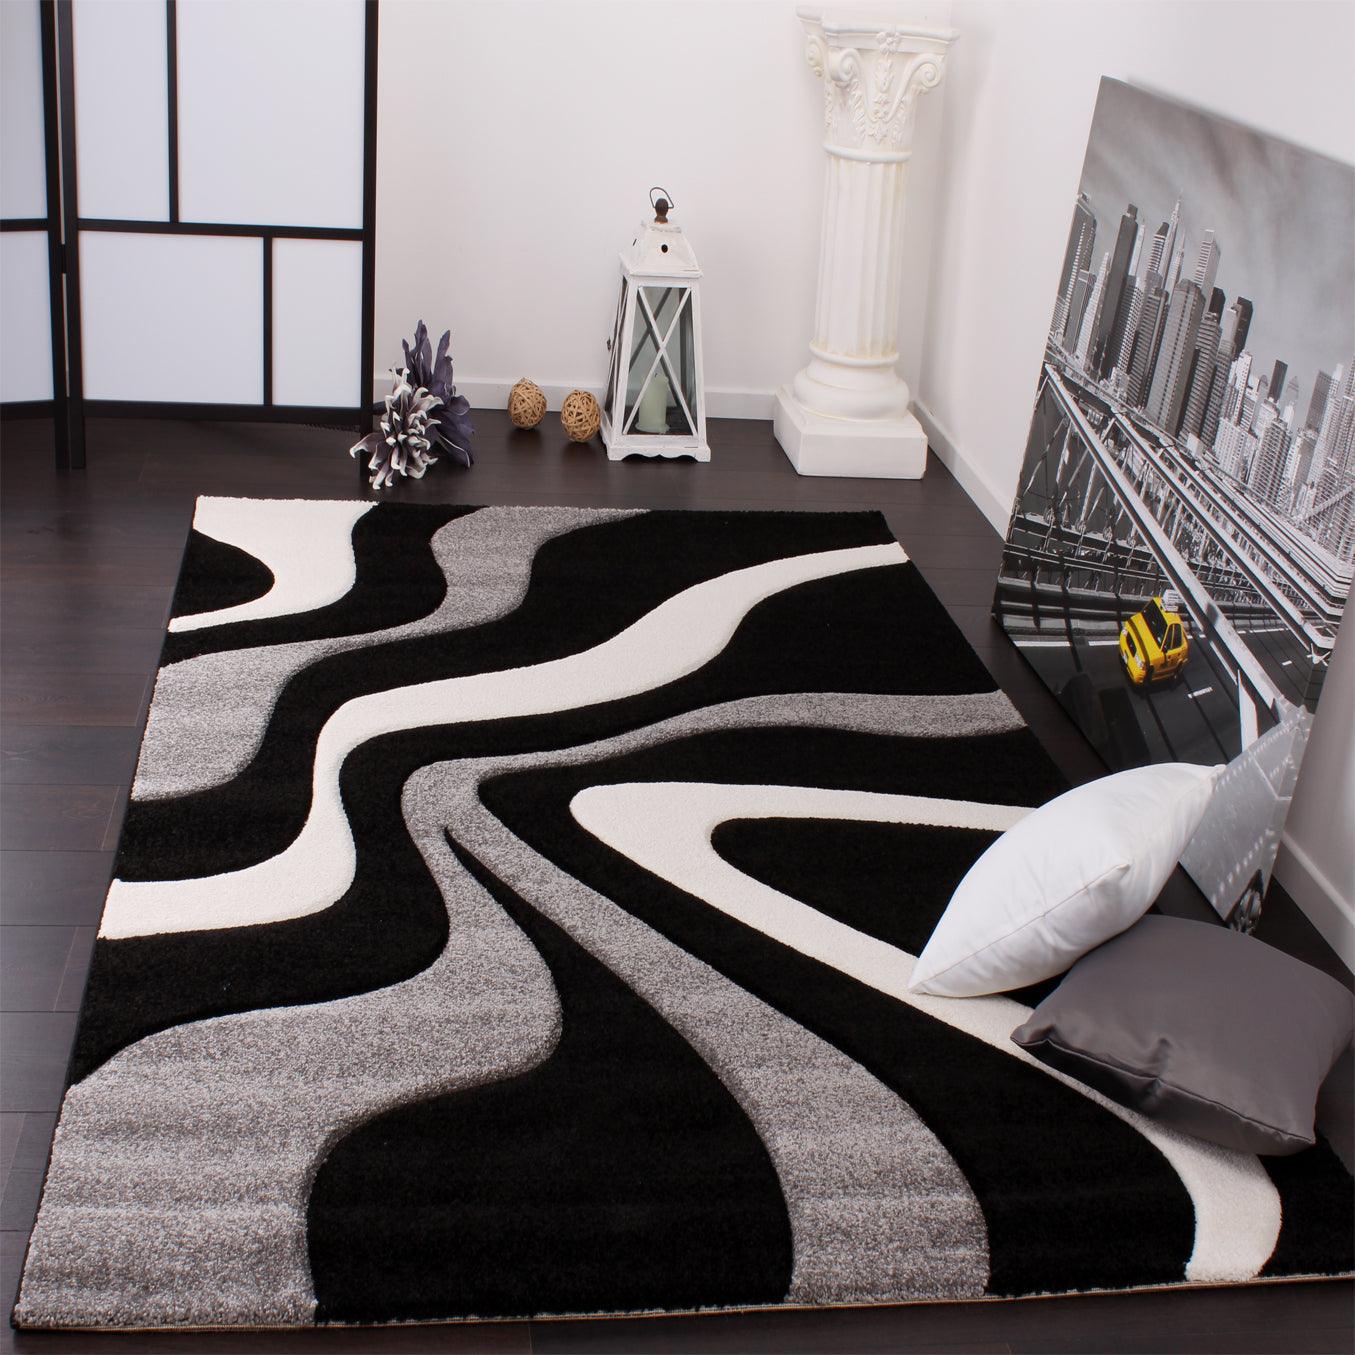 Paco Home Designer Rug with Contour Cut Striped Model in Grey Black and Red  Mixture, Size:2' x 3'7